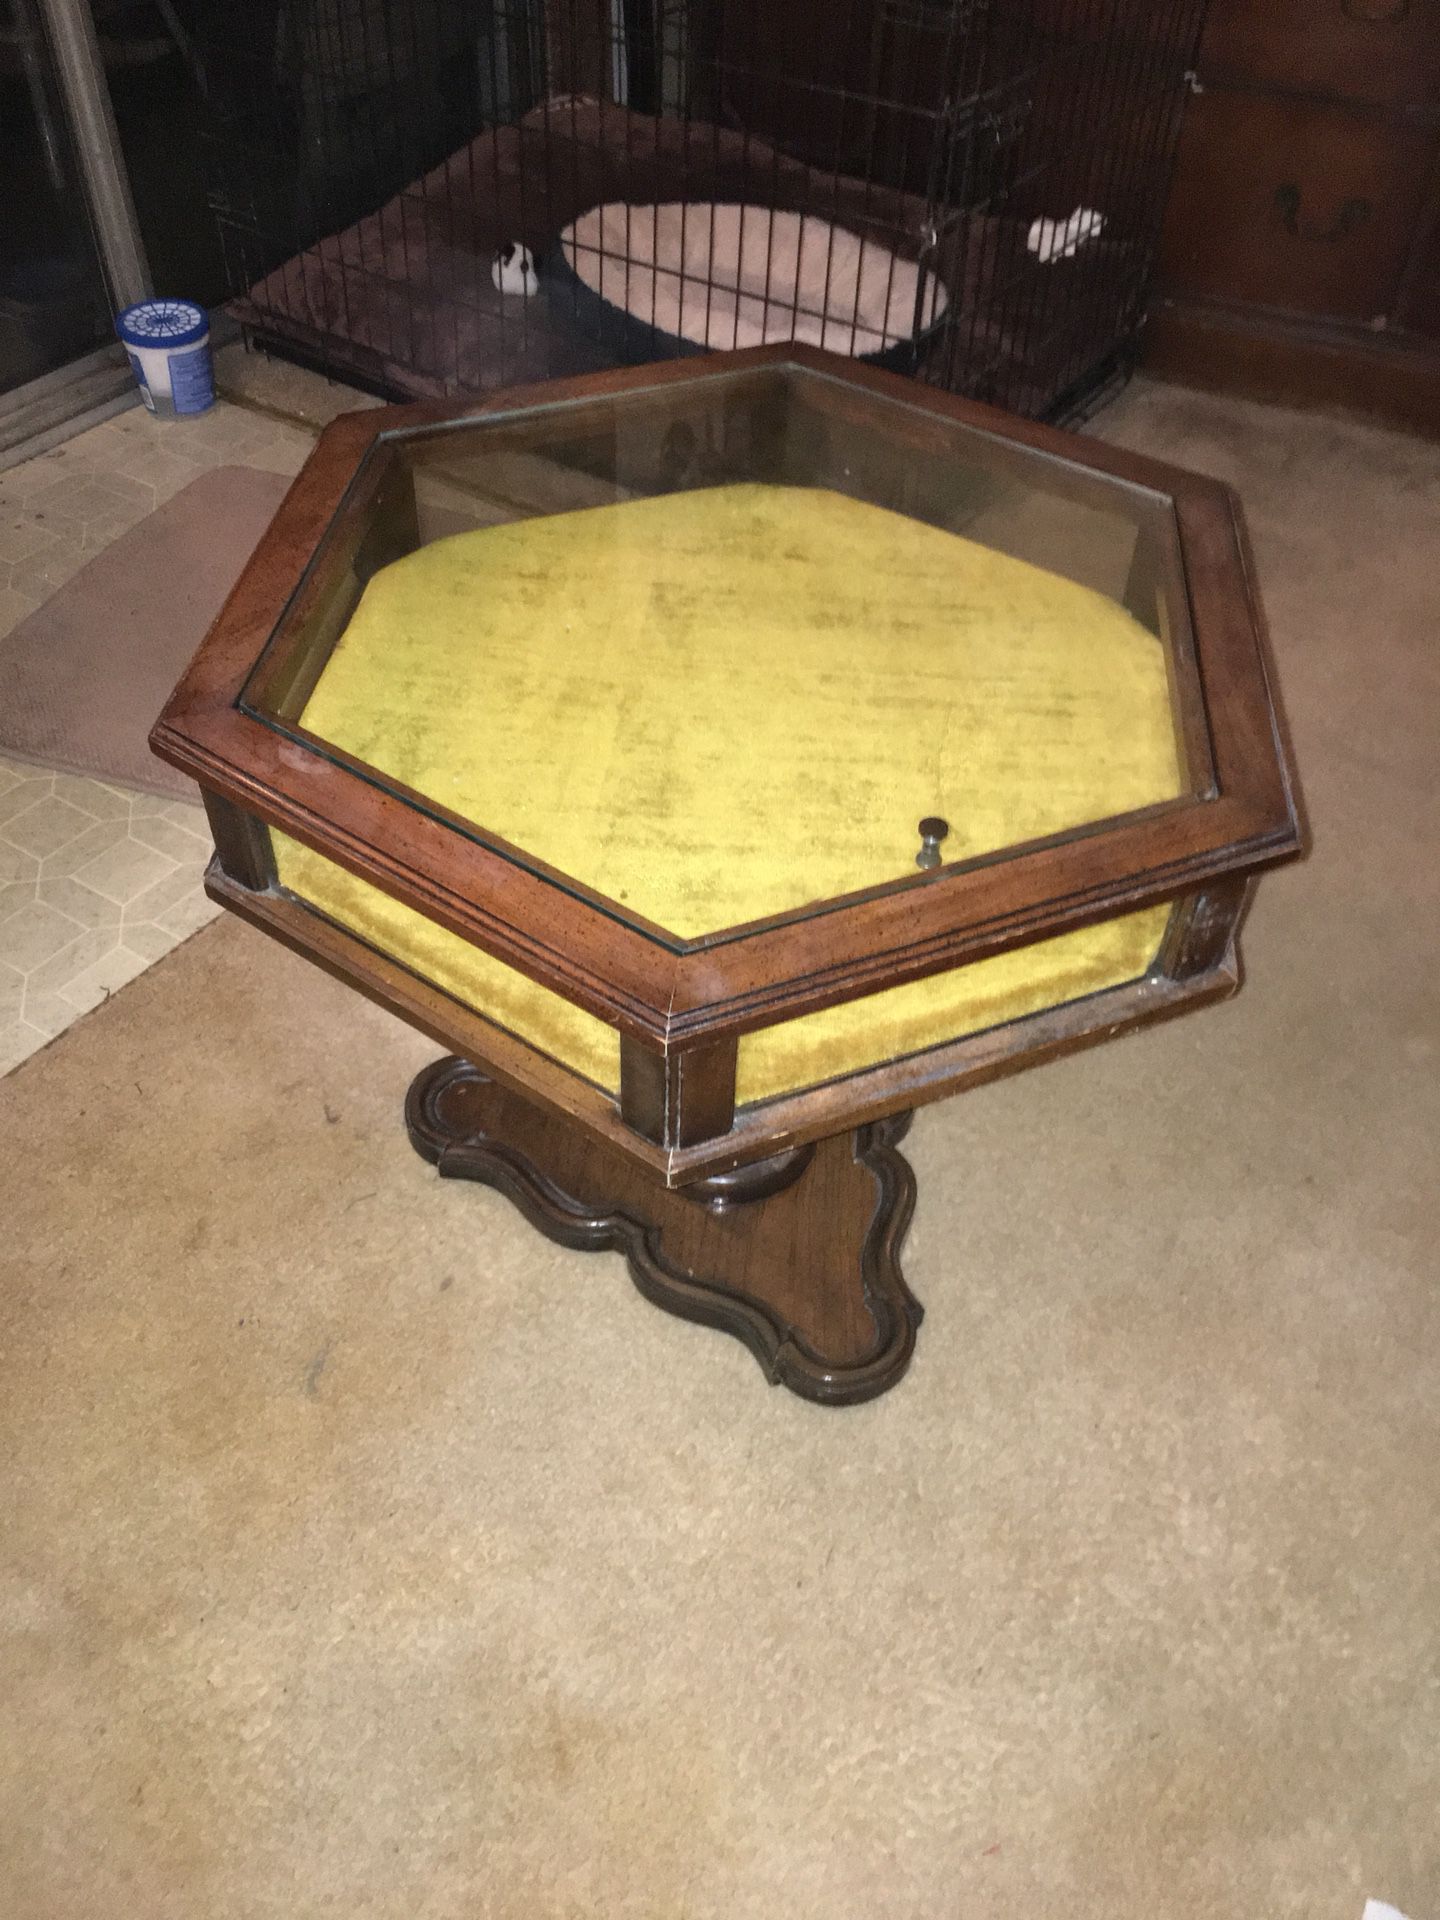 Display case coffee table/ end table